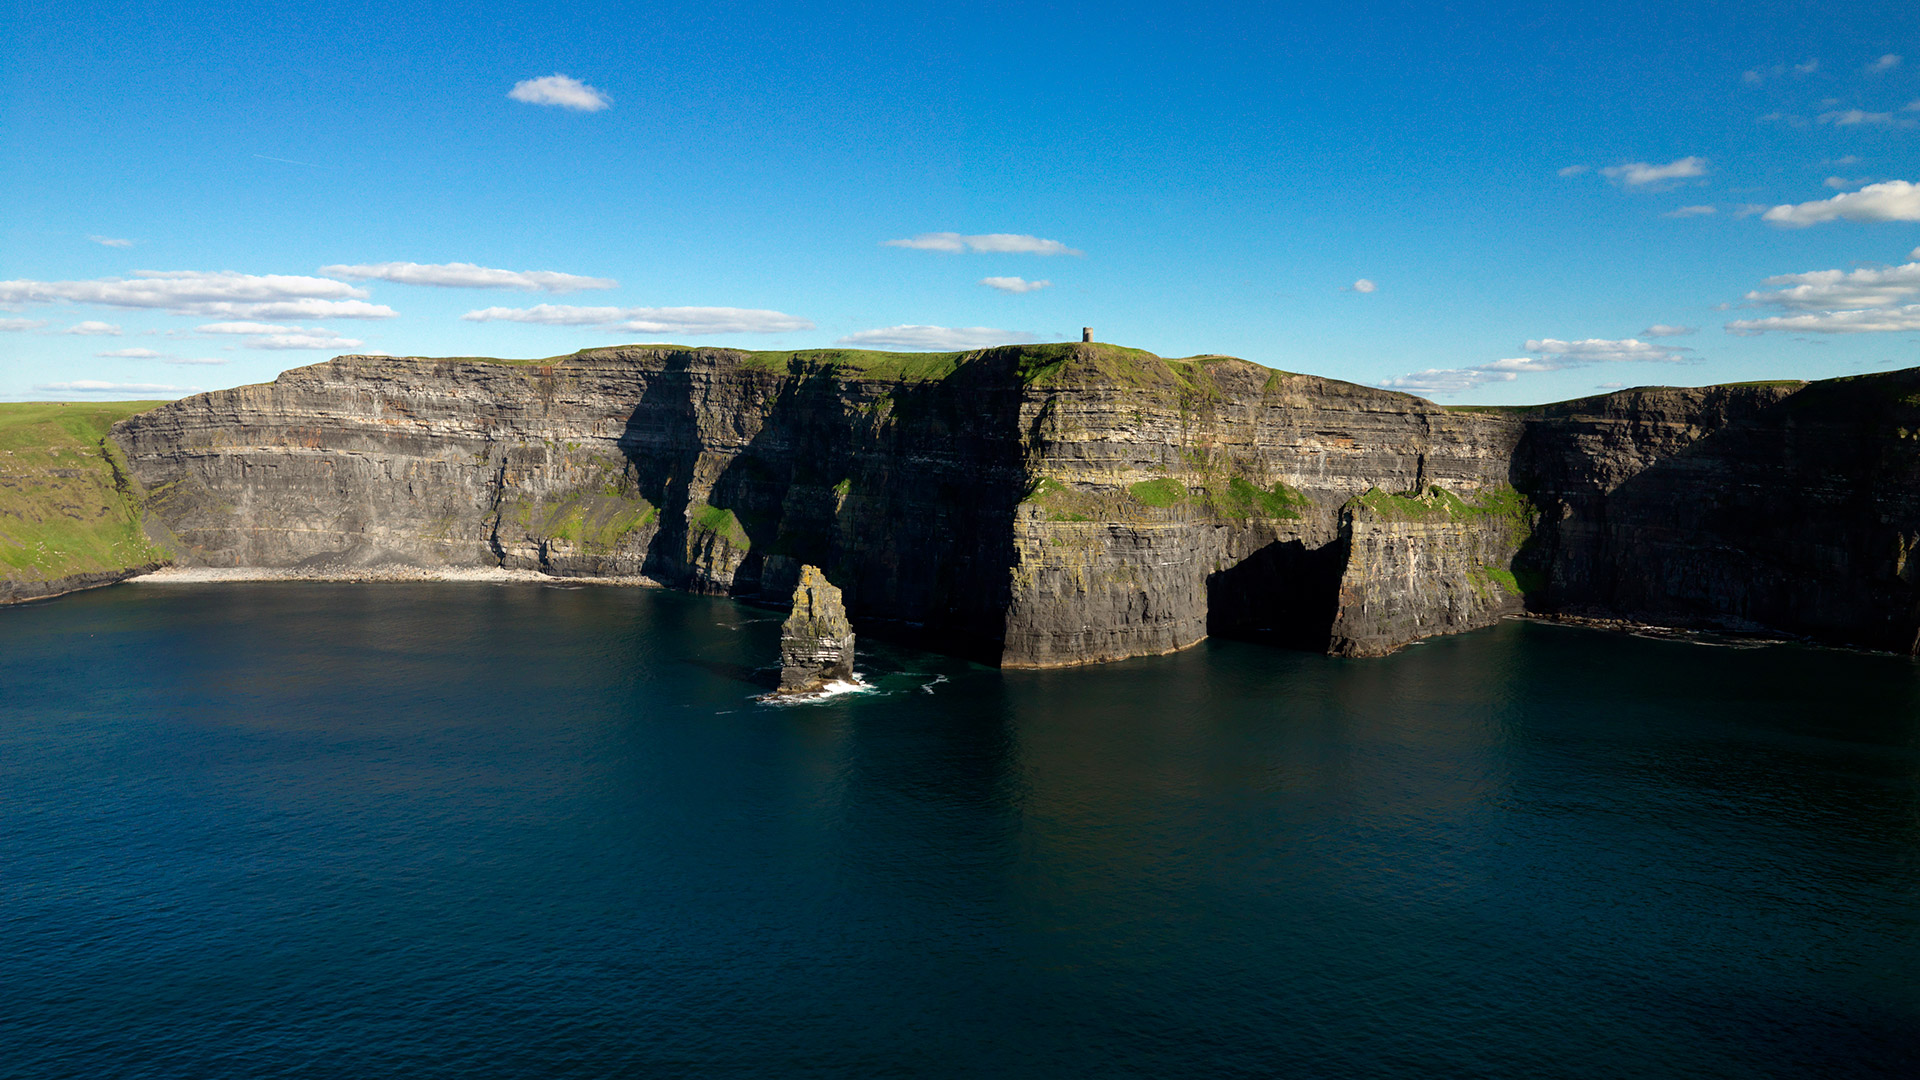 Public consultation on future strategy for the Cliffs of Moher